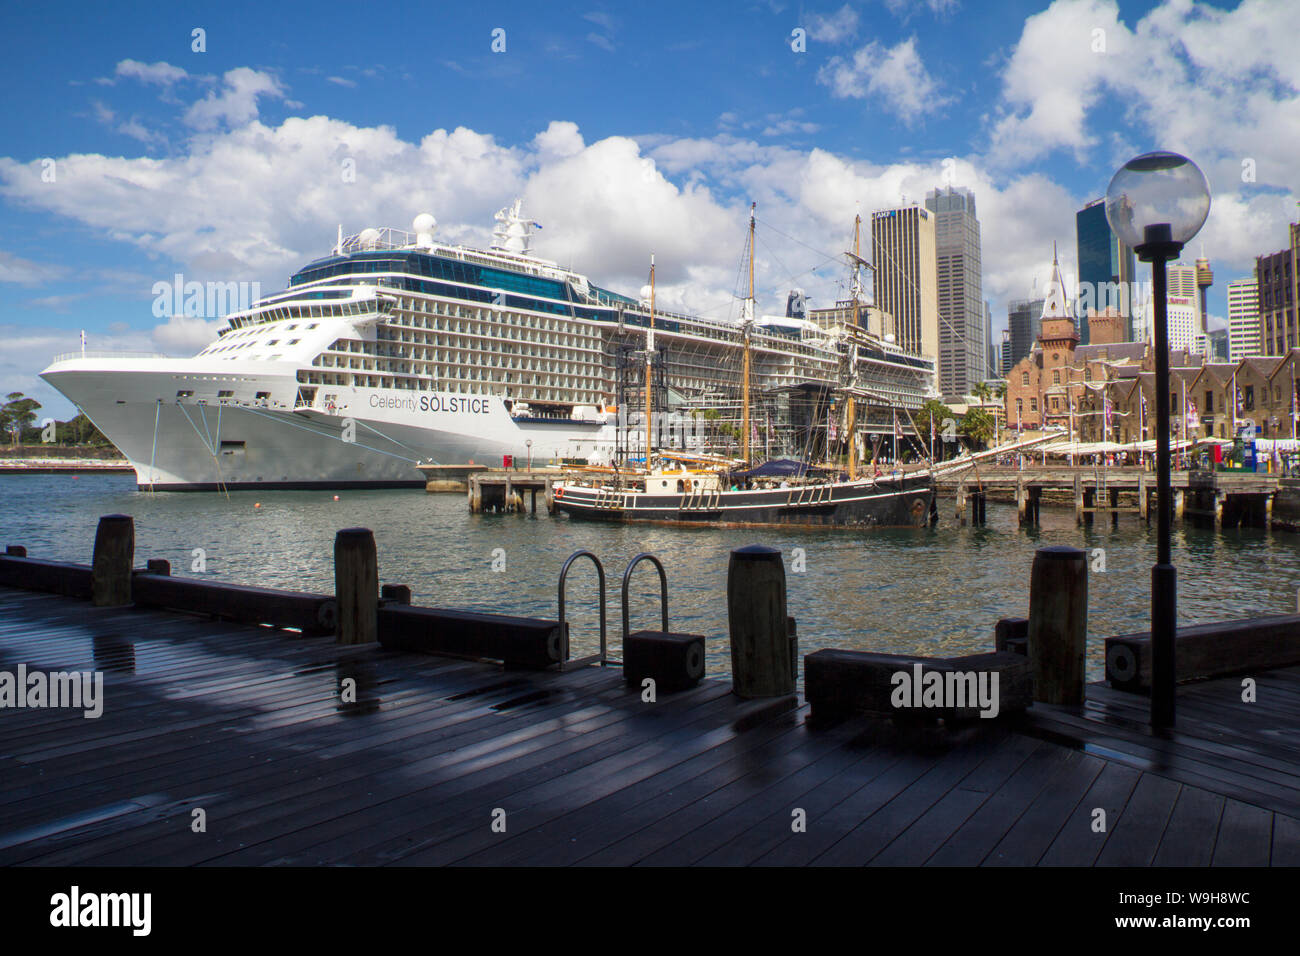 Sydney, Australia - April 7th 2013: Cruise ship Celebrity Solstice in Sydney Harbour. The sity is a favourite cruise destination. Stock Photo